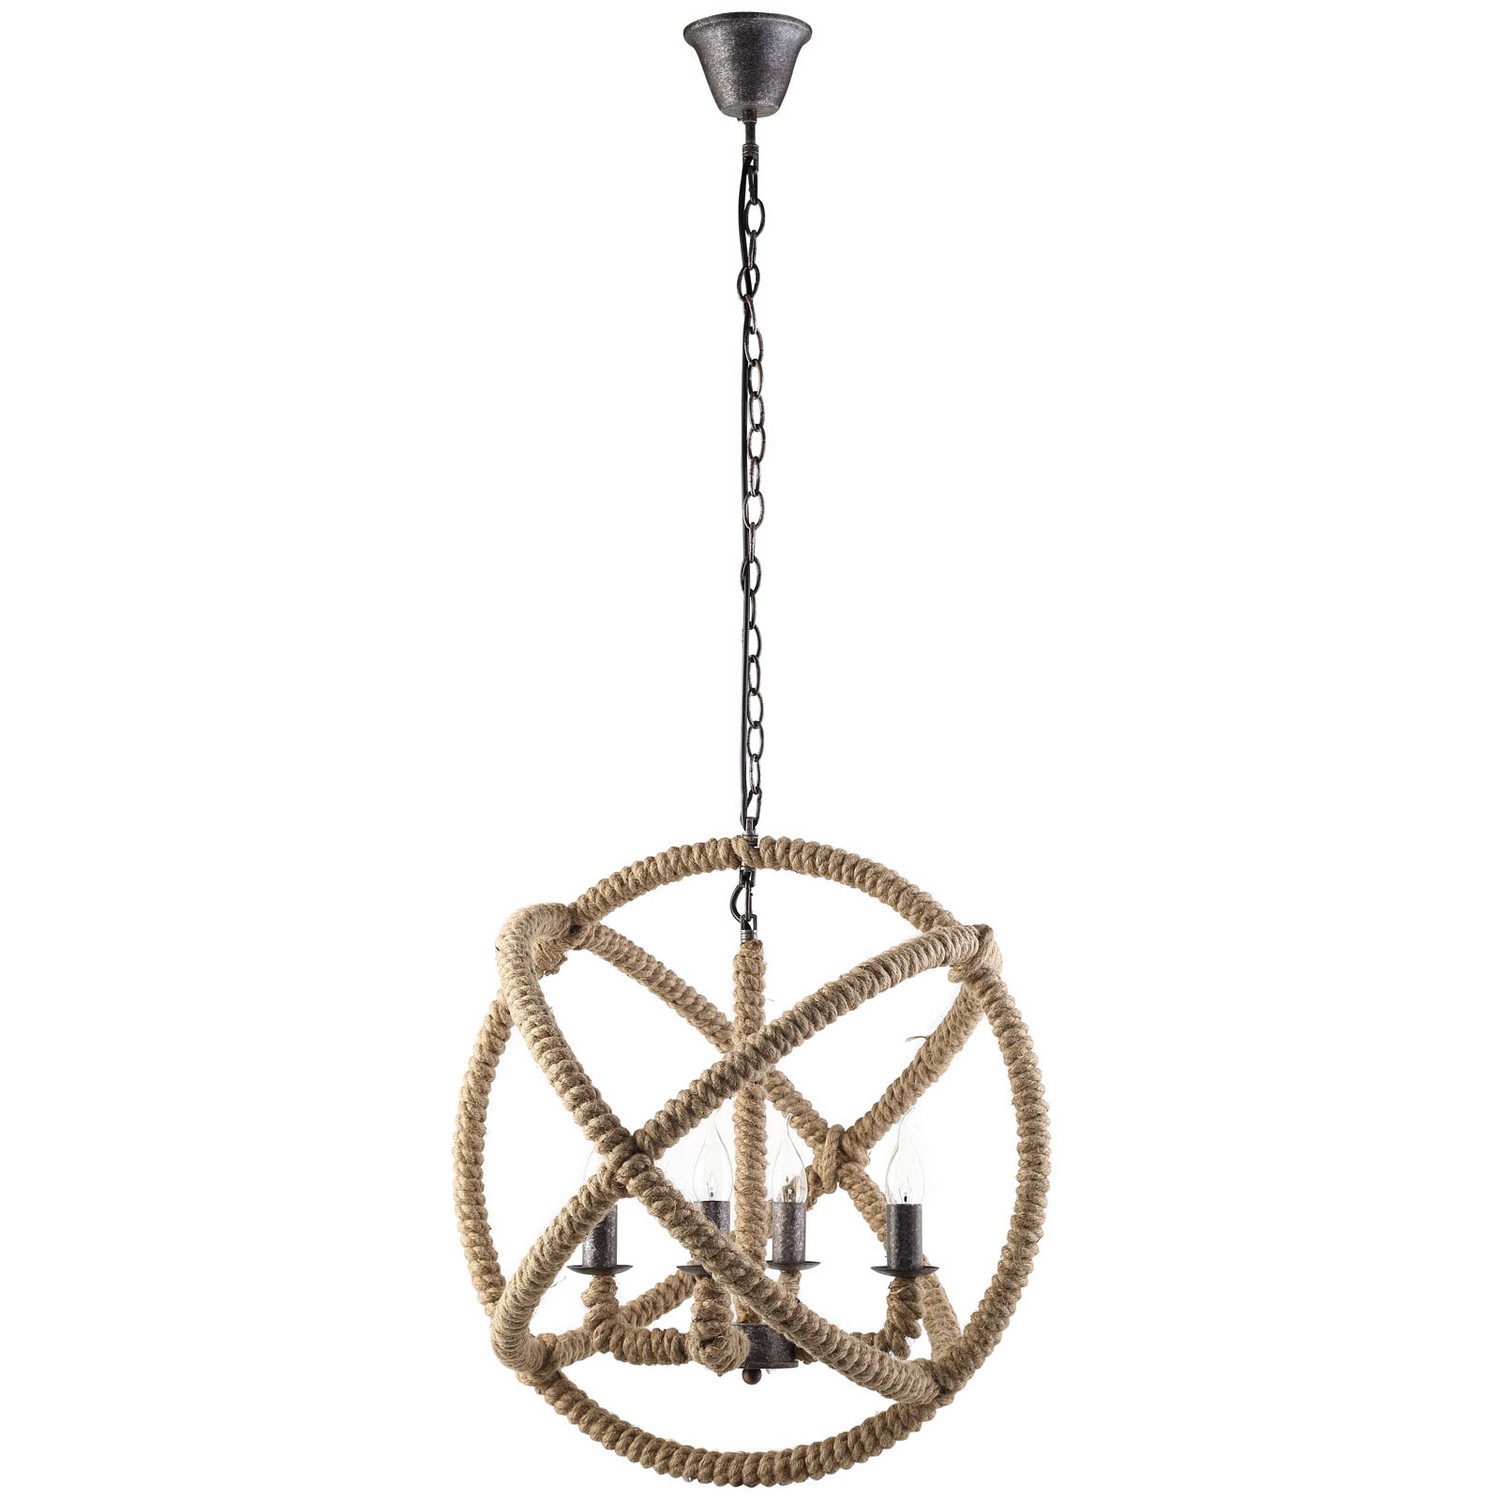 Modway Intention Chandelier - Brown